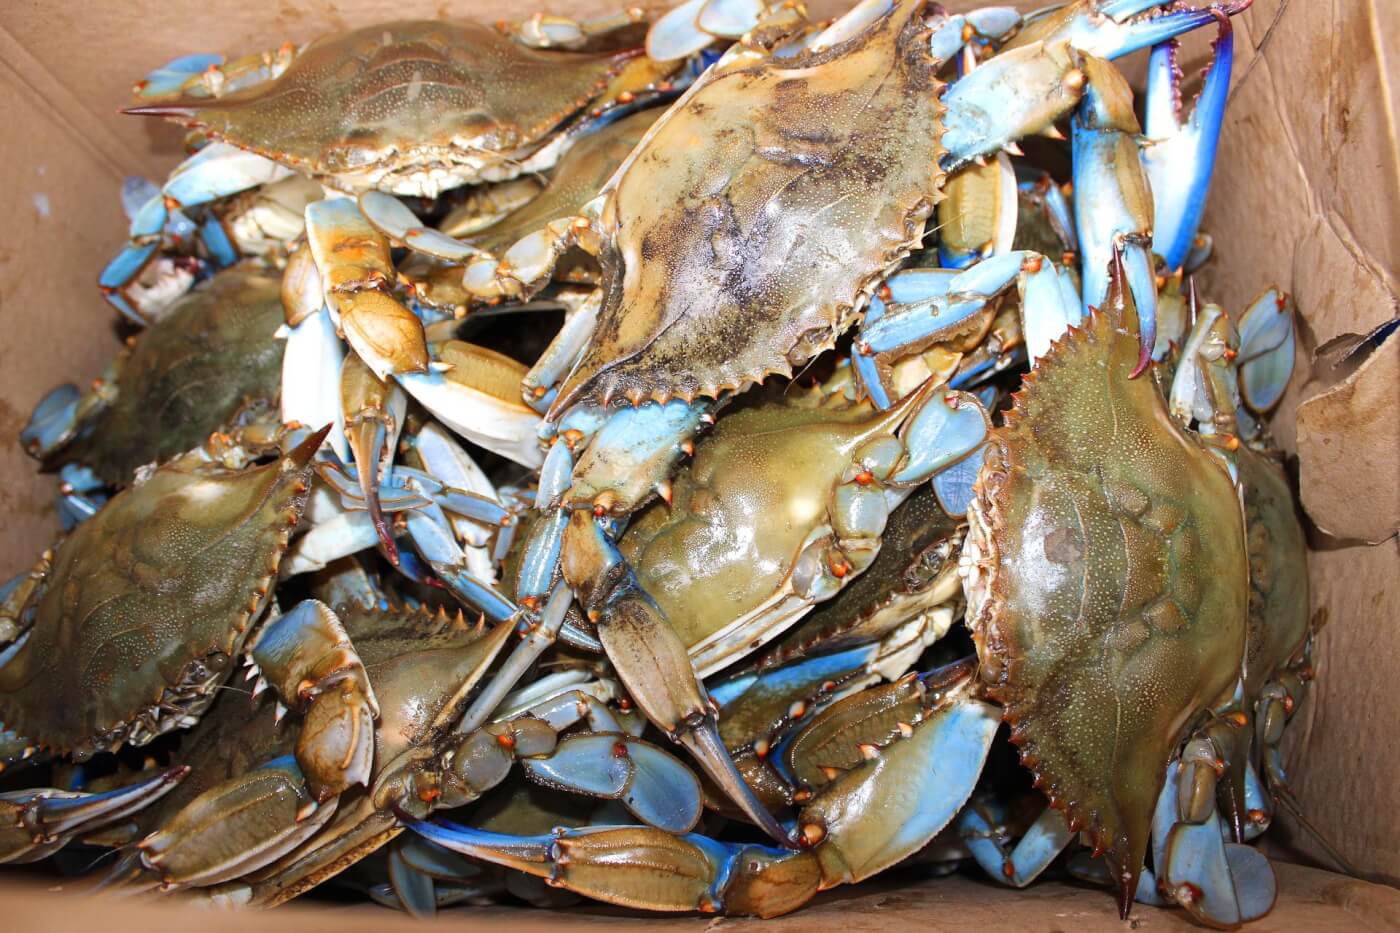 blue crabs piled into a cardboard box